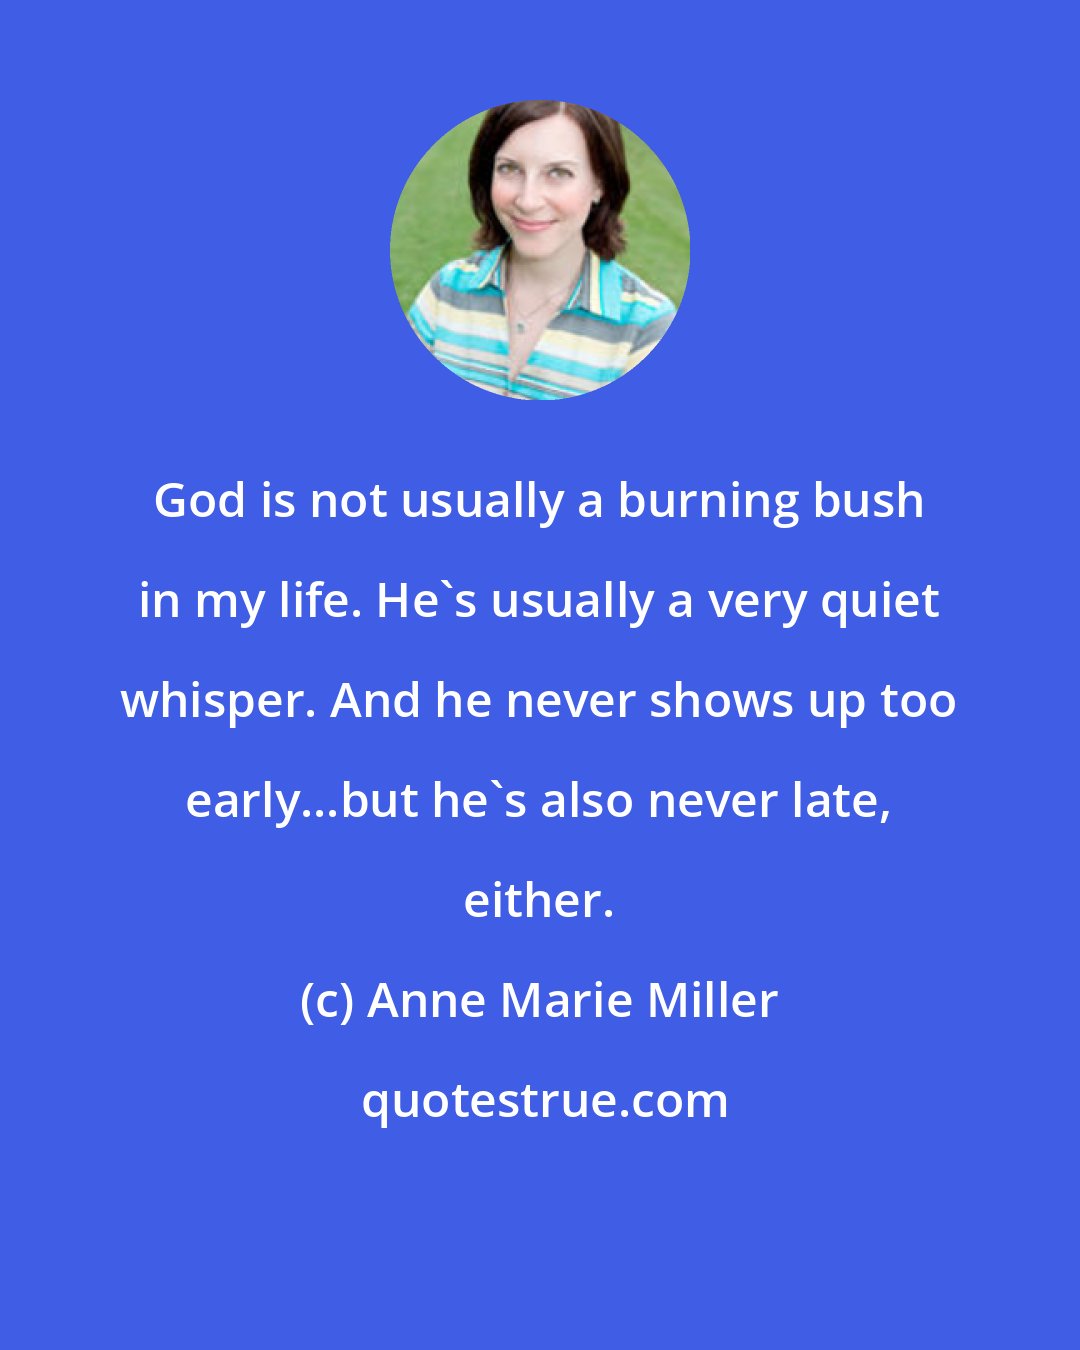 Anne Marie Miller: God is not usually a burning bush in my life. He's usually a very quiet whisper. And he never shows up too early...but he's also never late, either.